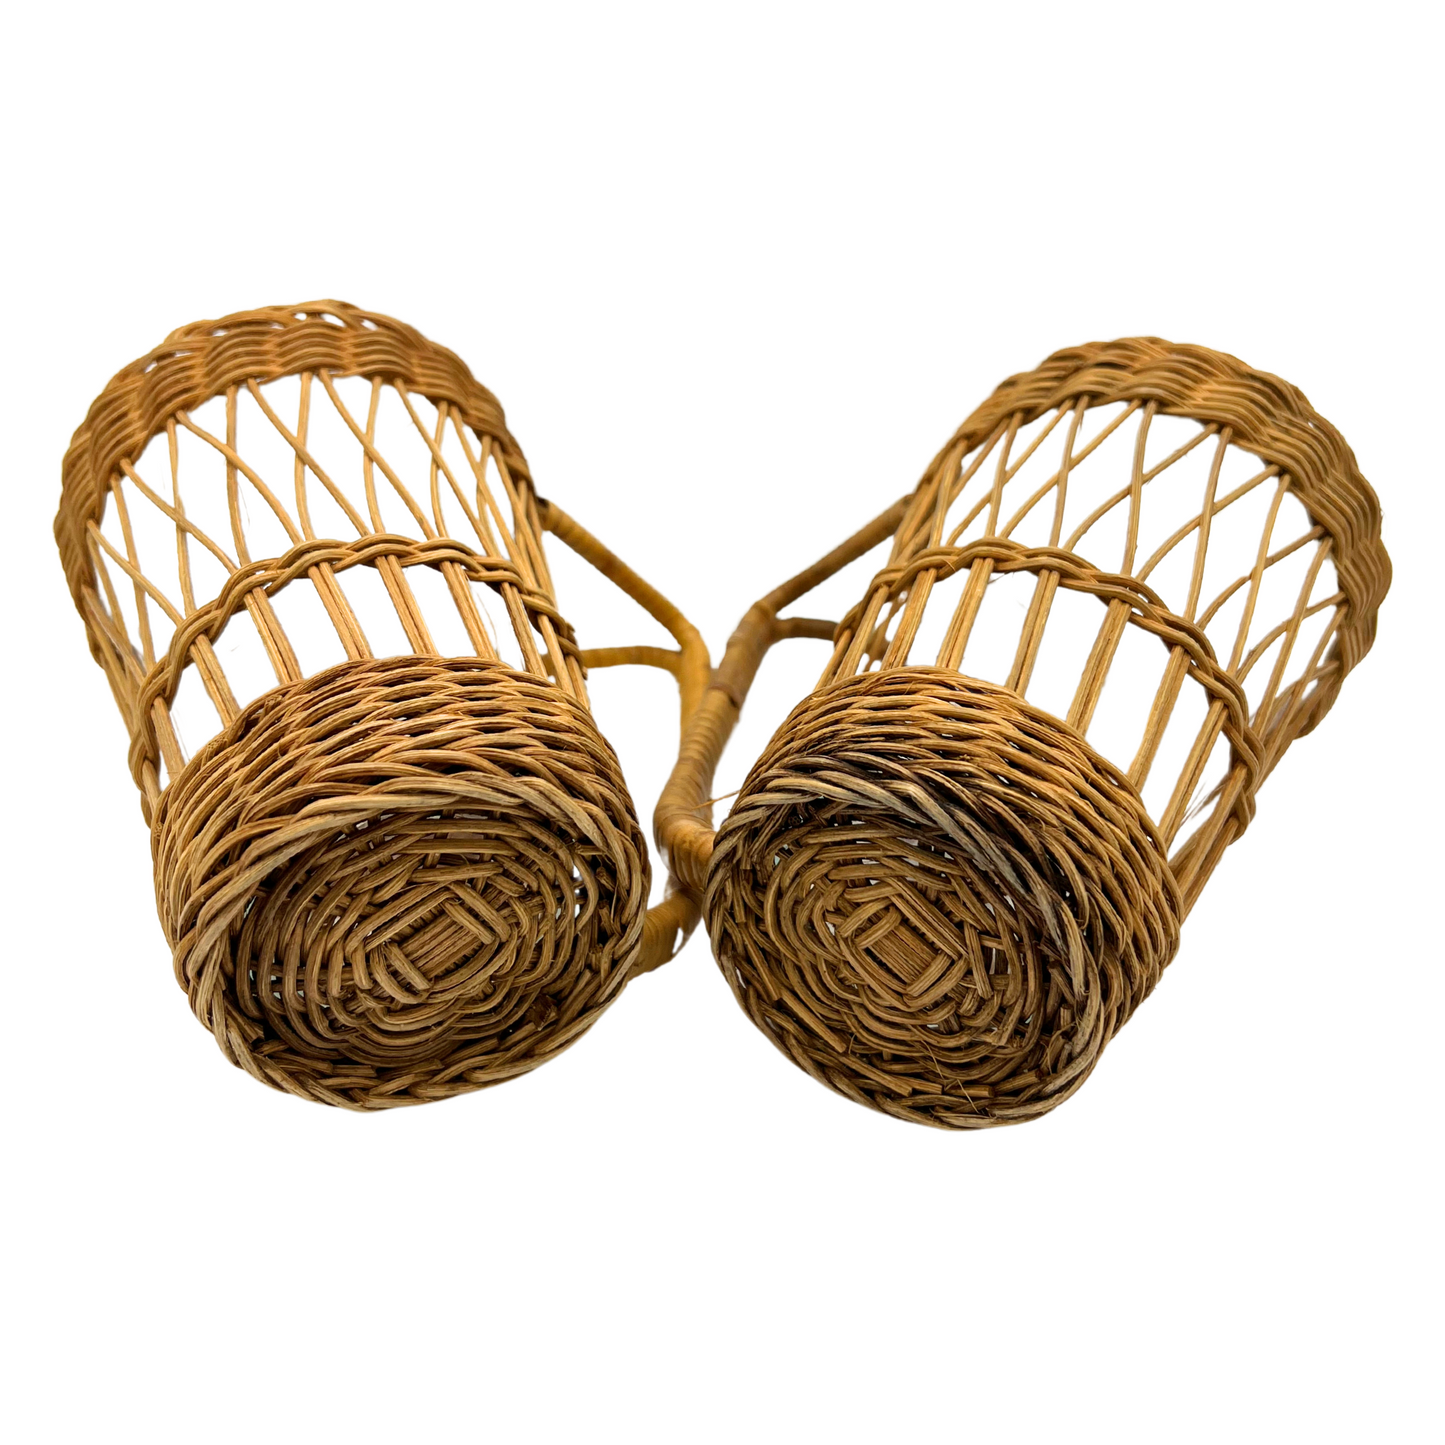 pair of vintage wicker wrapped glasses